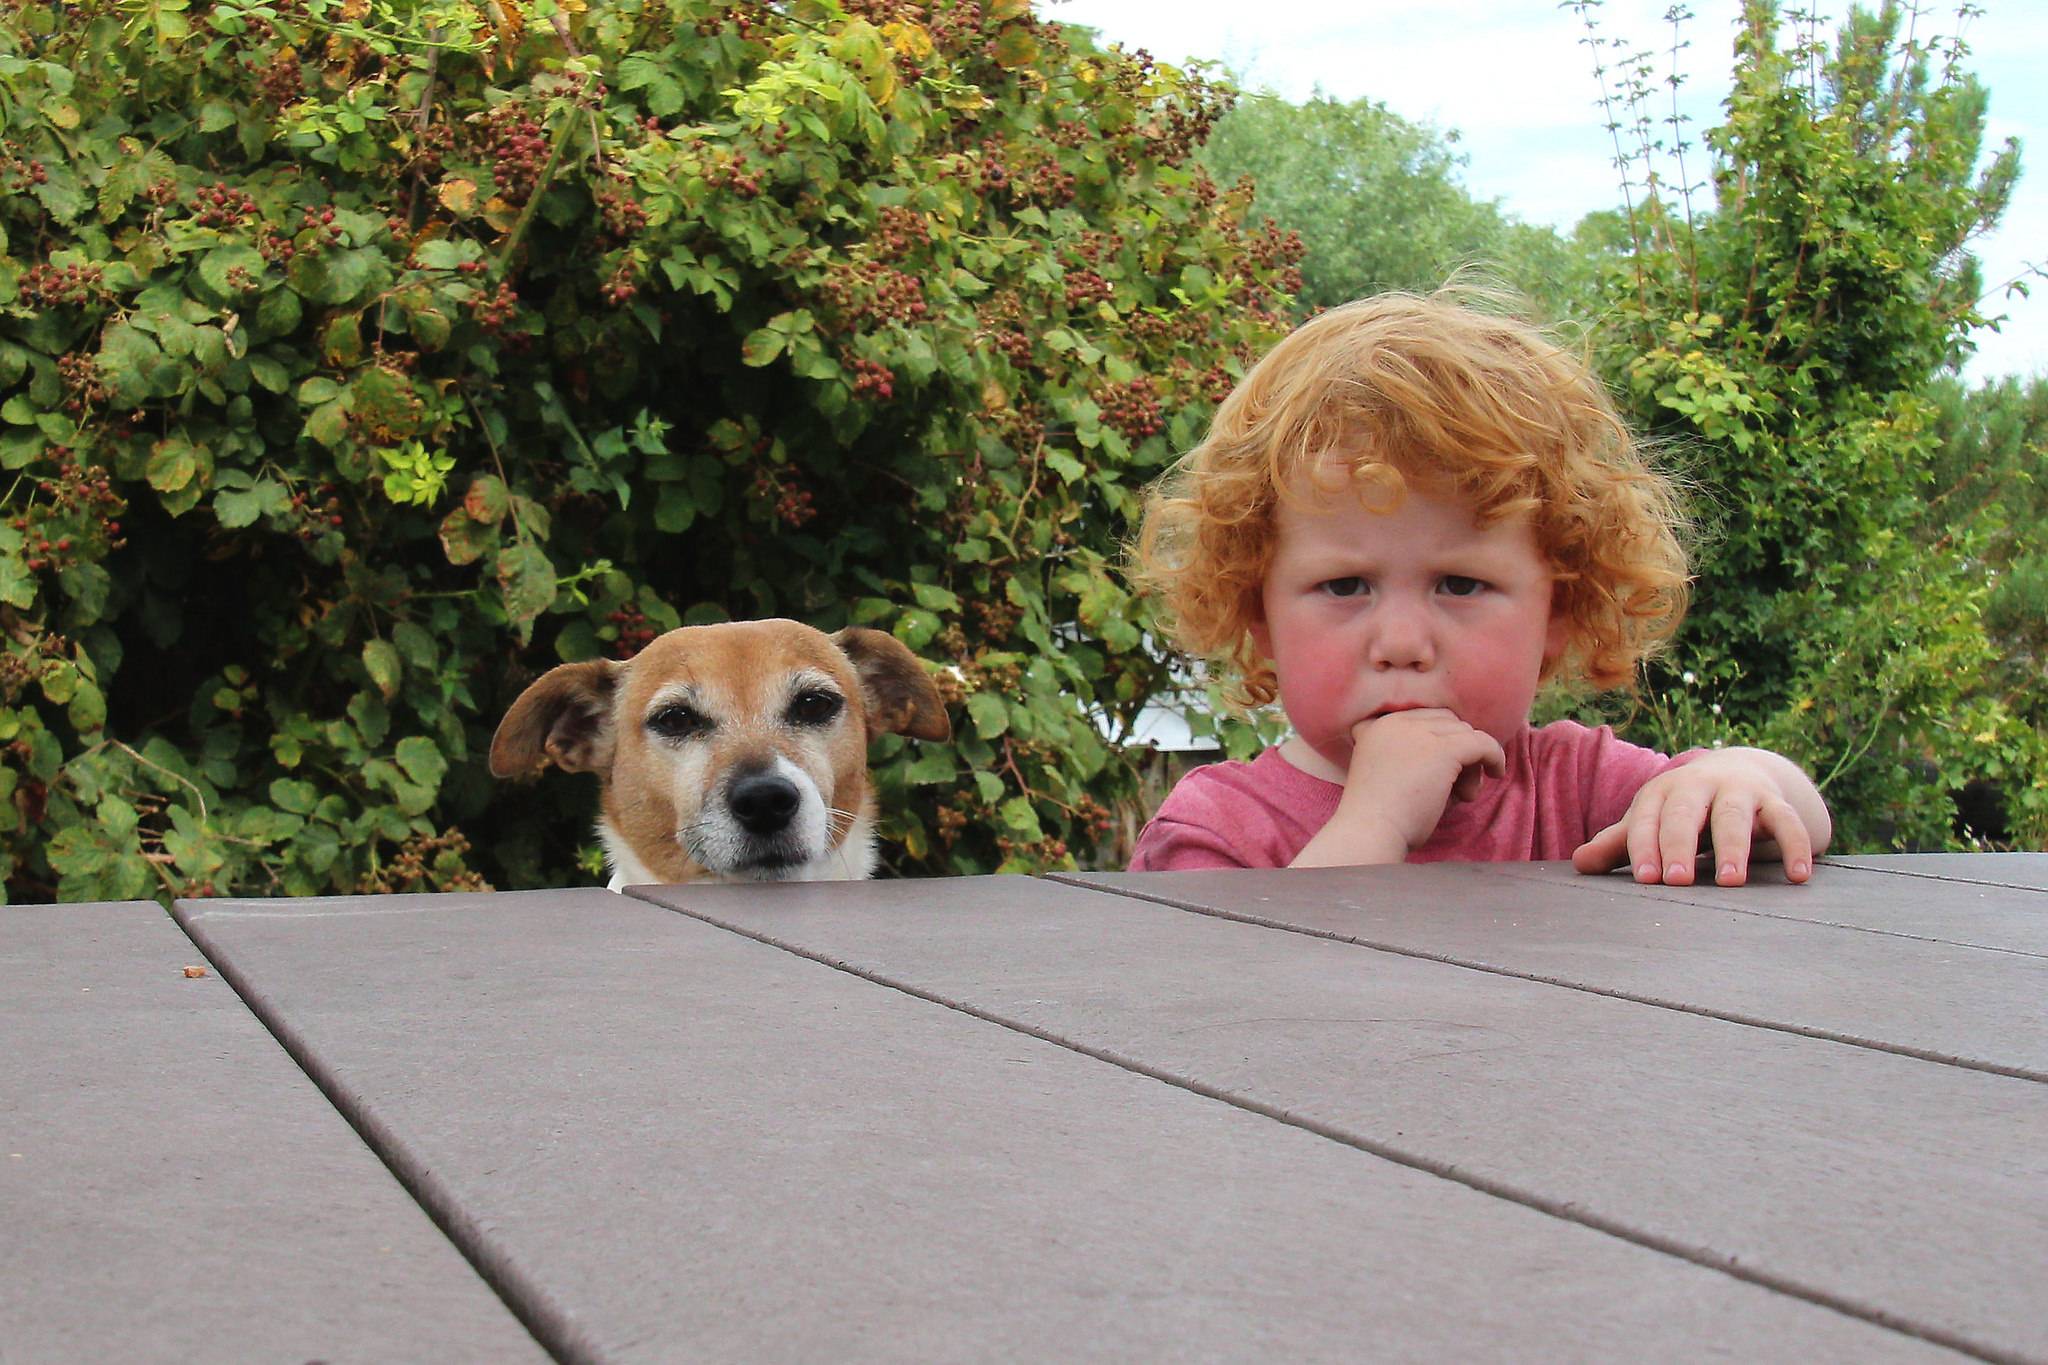 Kids get on better with their pets than their siblings